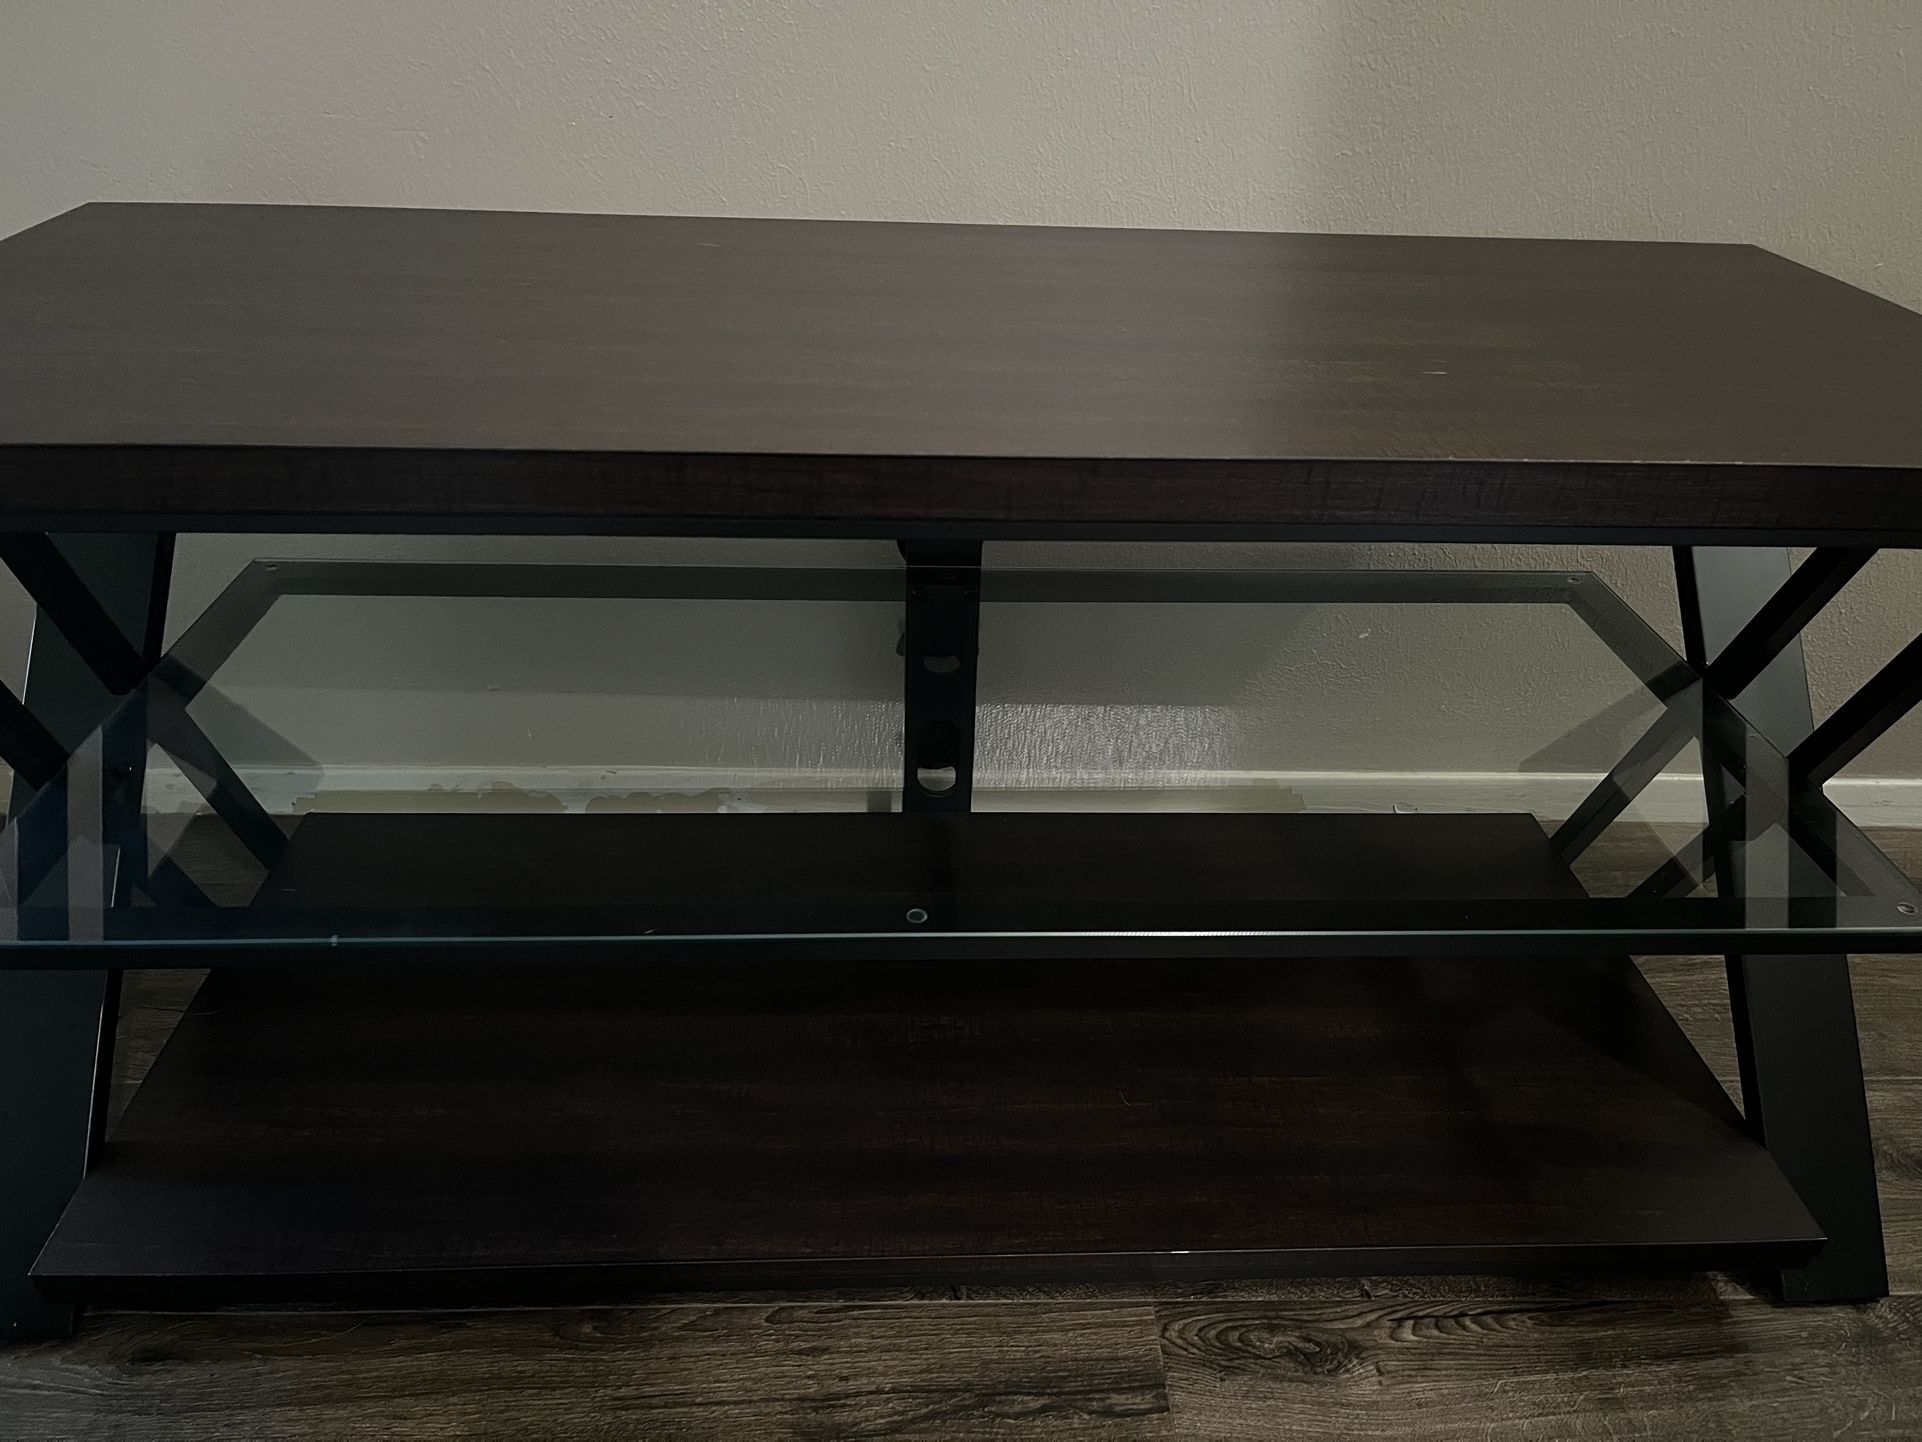 Tv Stand; Excellent Condition! 